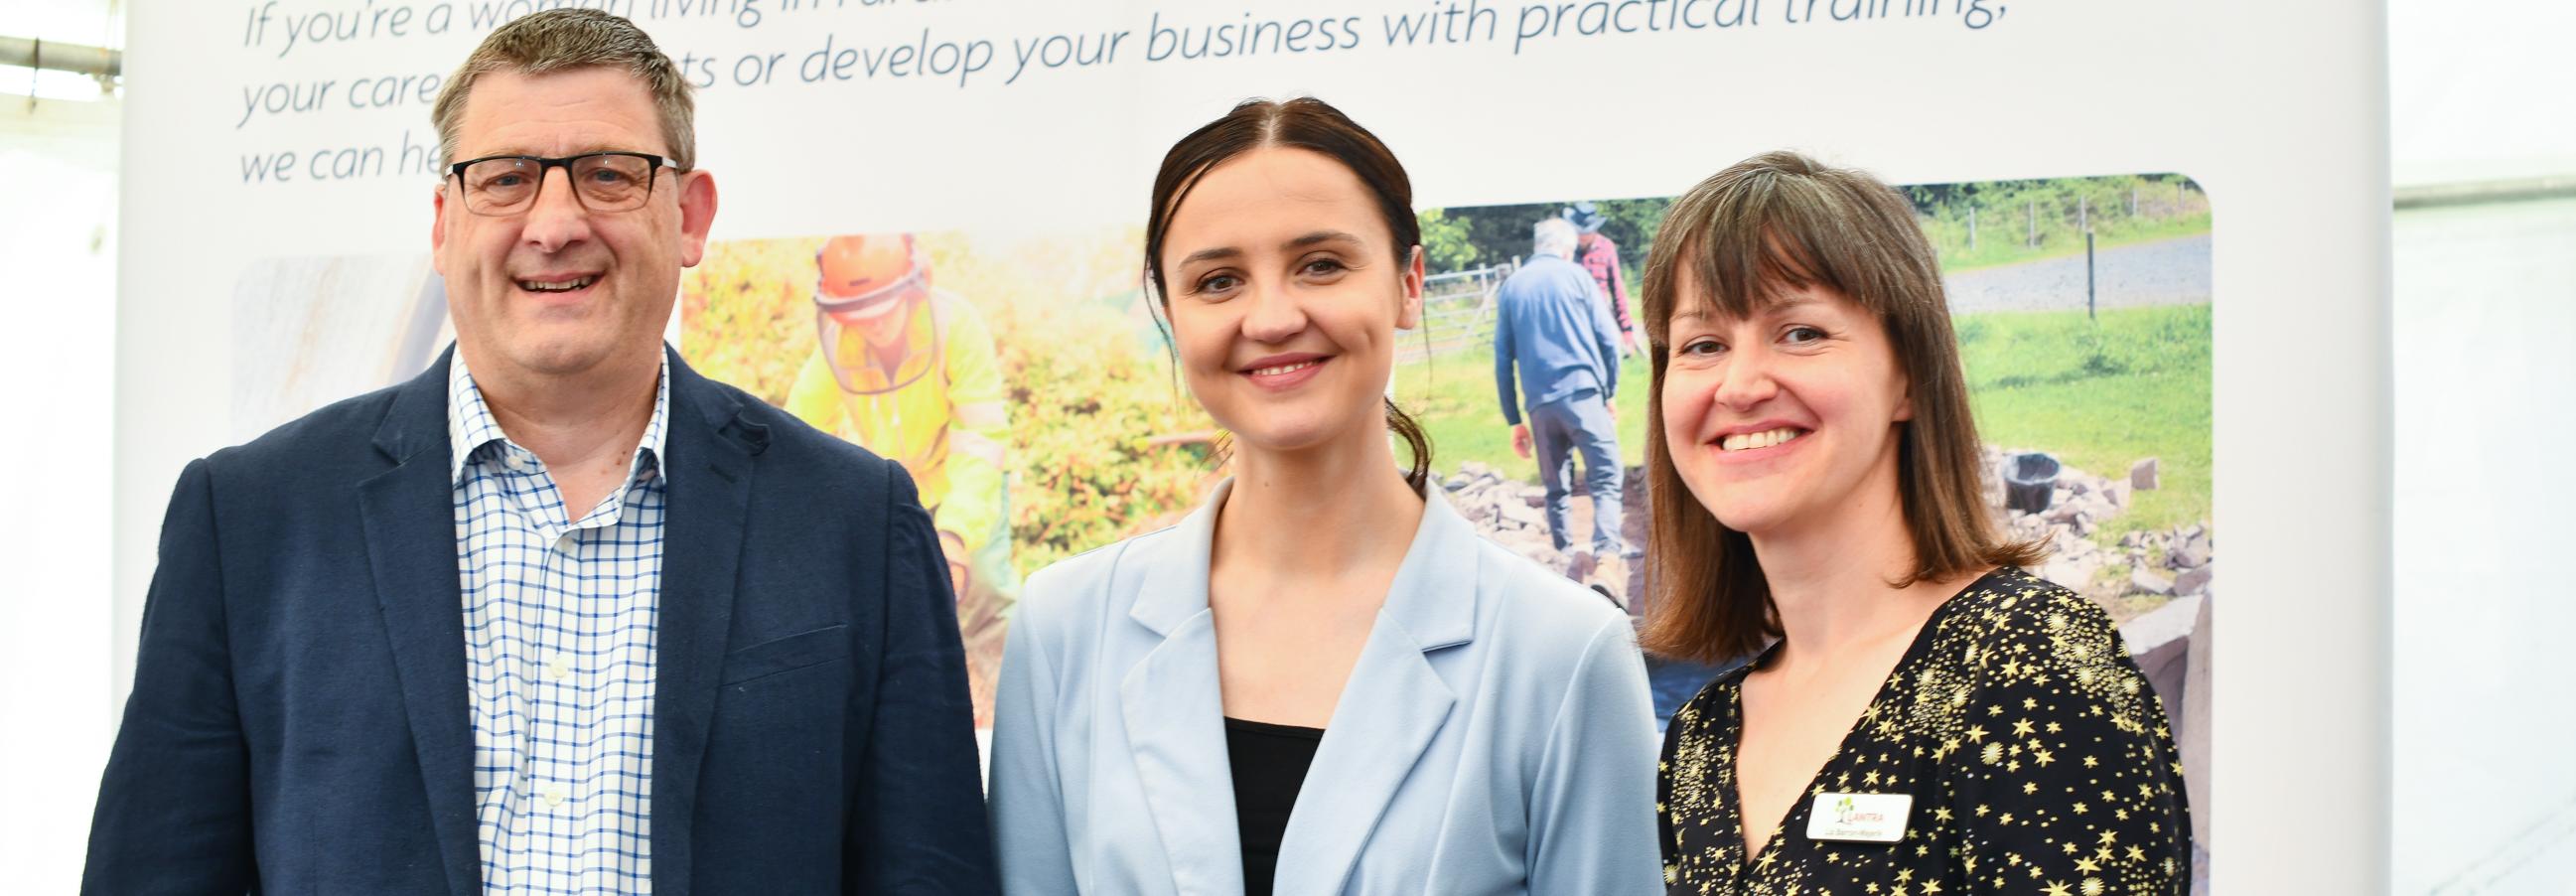 Marcus Potter, Lantra’s Chief Executive; Màiri McAllan, Minister for Environment and Land Reform, and Dr Liz Barron-Majerik MBE MICFor, Lantra’s Scotland Director